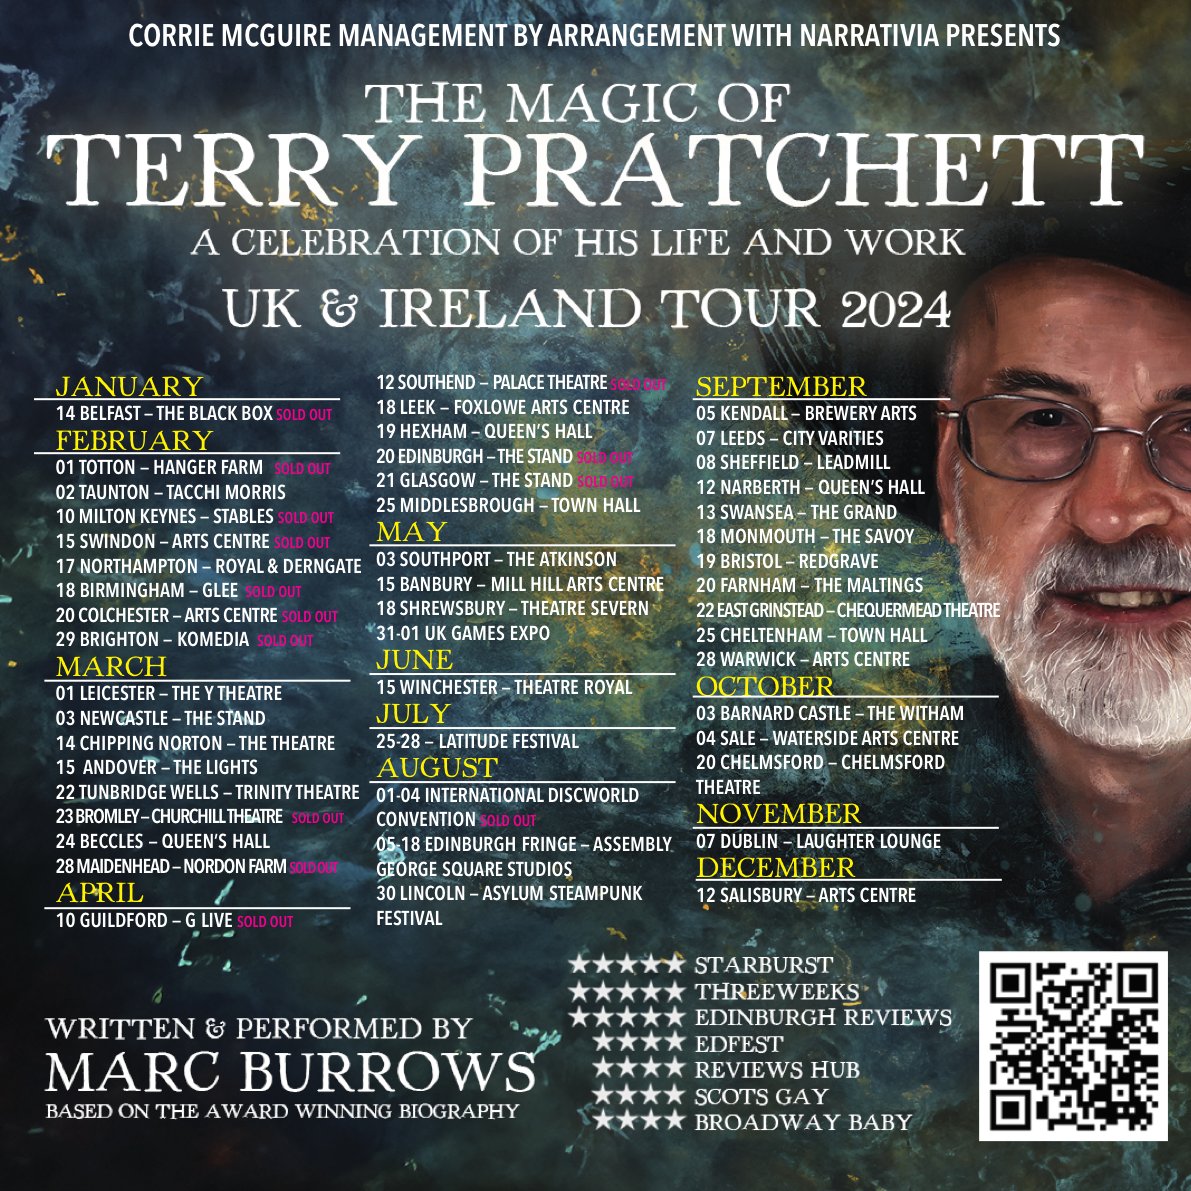 NEW DATES ON SALE! The Magic of Terry Pratchett tour forges forward to the end of the year, tickets are now available in Dublin (@LaughterLounge), Salisbury (@WiltsCreative) and as many corners of the country as we can get to: marcburrows.co.uk/live-dates #GNUTerryPratchett